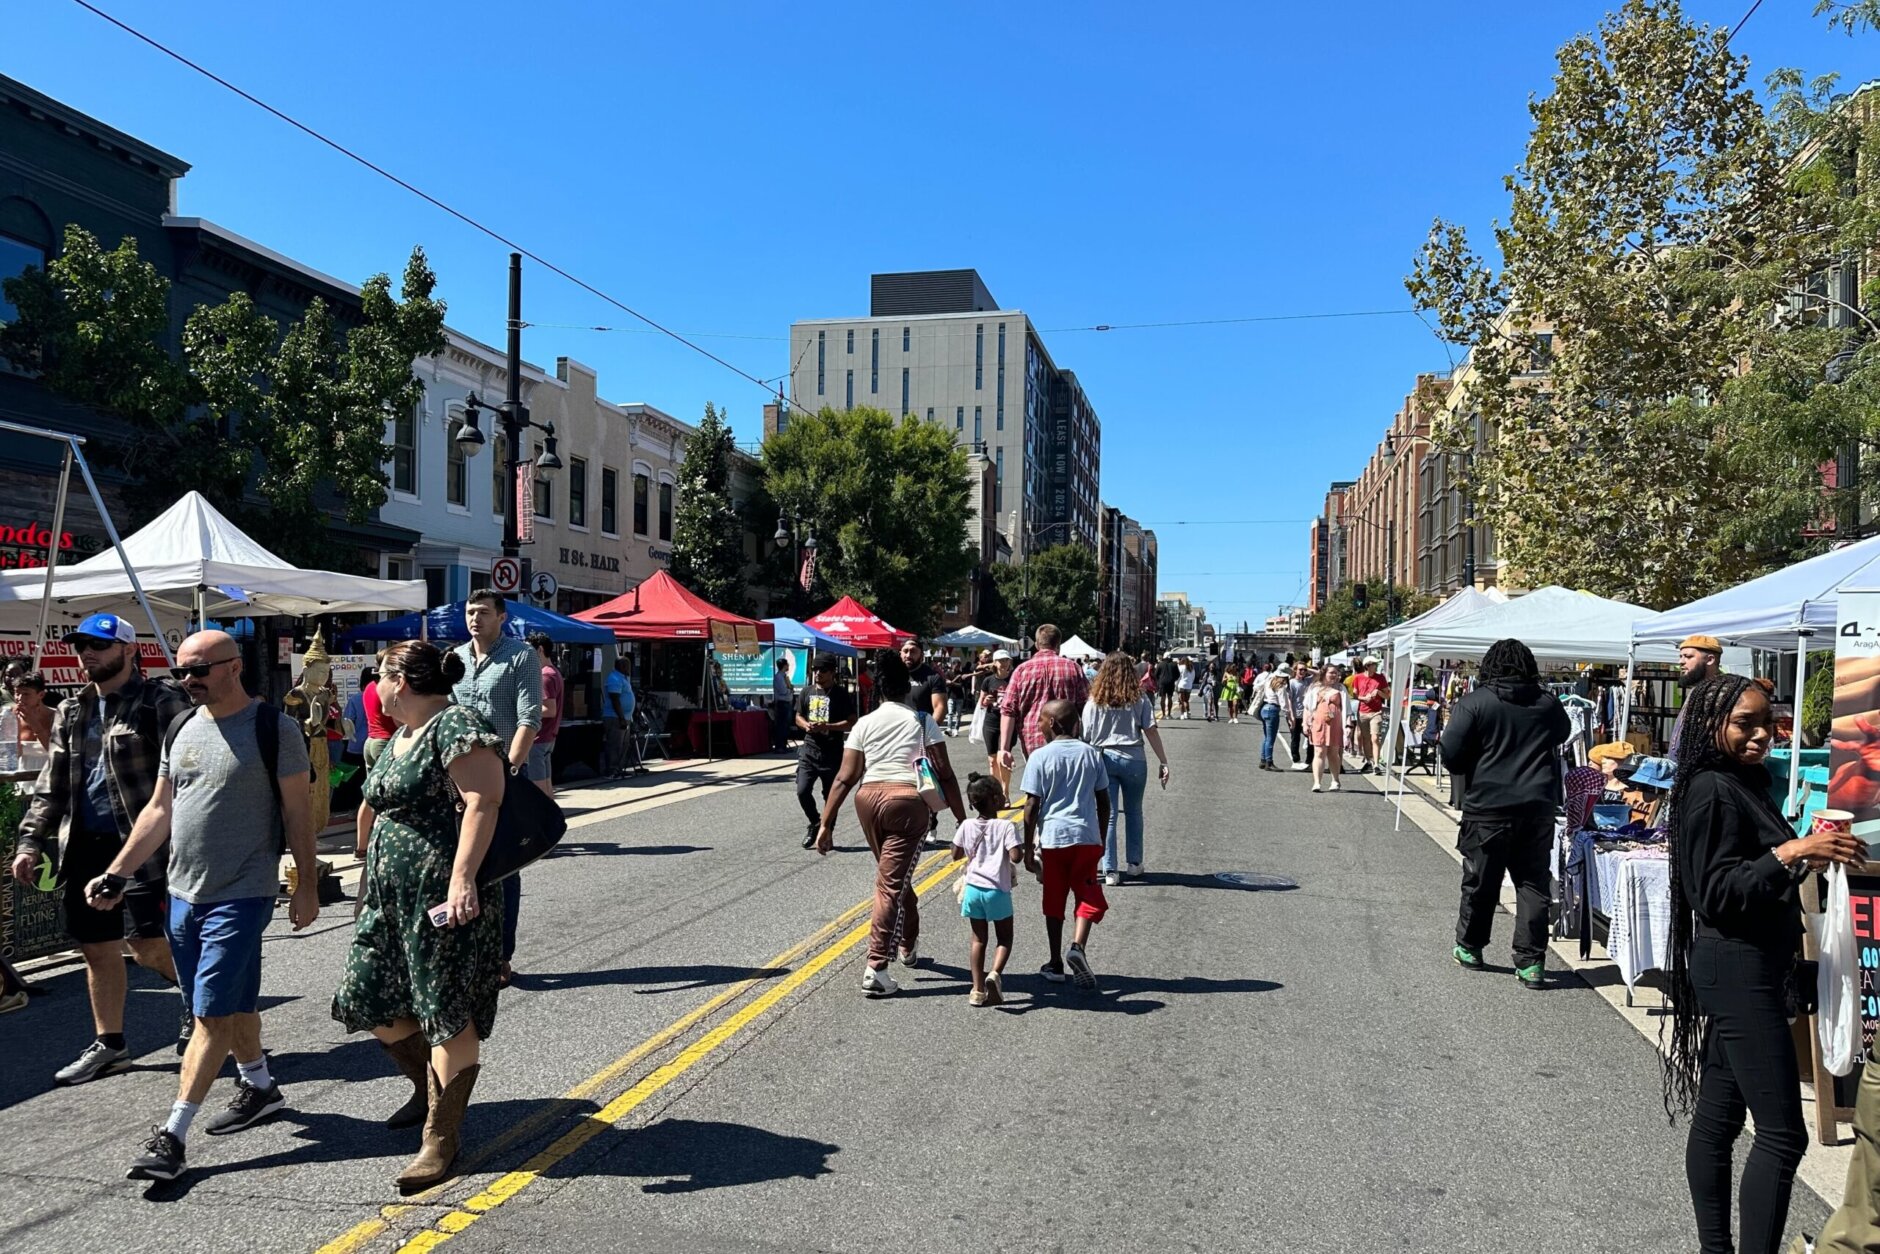 <p>Other people walked the 11 blocks of the festival to visit different food trucks and vendors.</p>
<p>&#8220;It&#8217;s really nice to be out here,&#8221; Cyril Hamilton said. &#8220;The weather is just perfect, like a little bit of breeze, but not too much.&#8221;</p>
